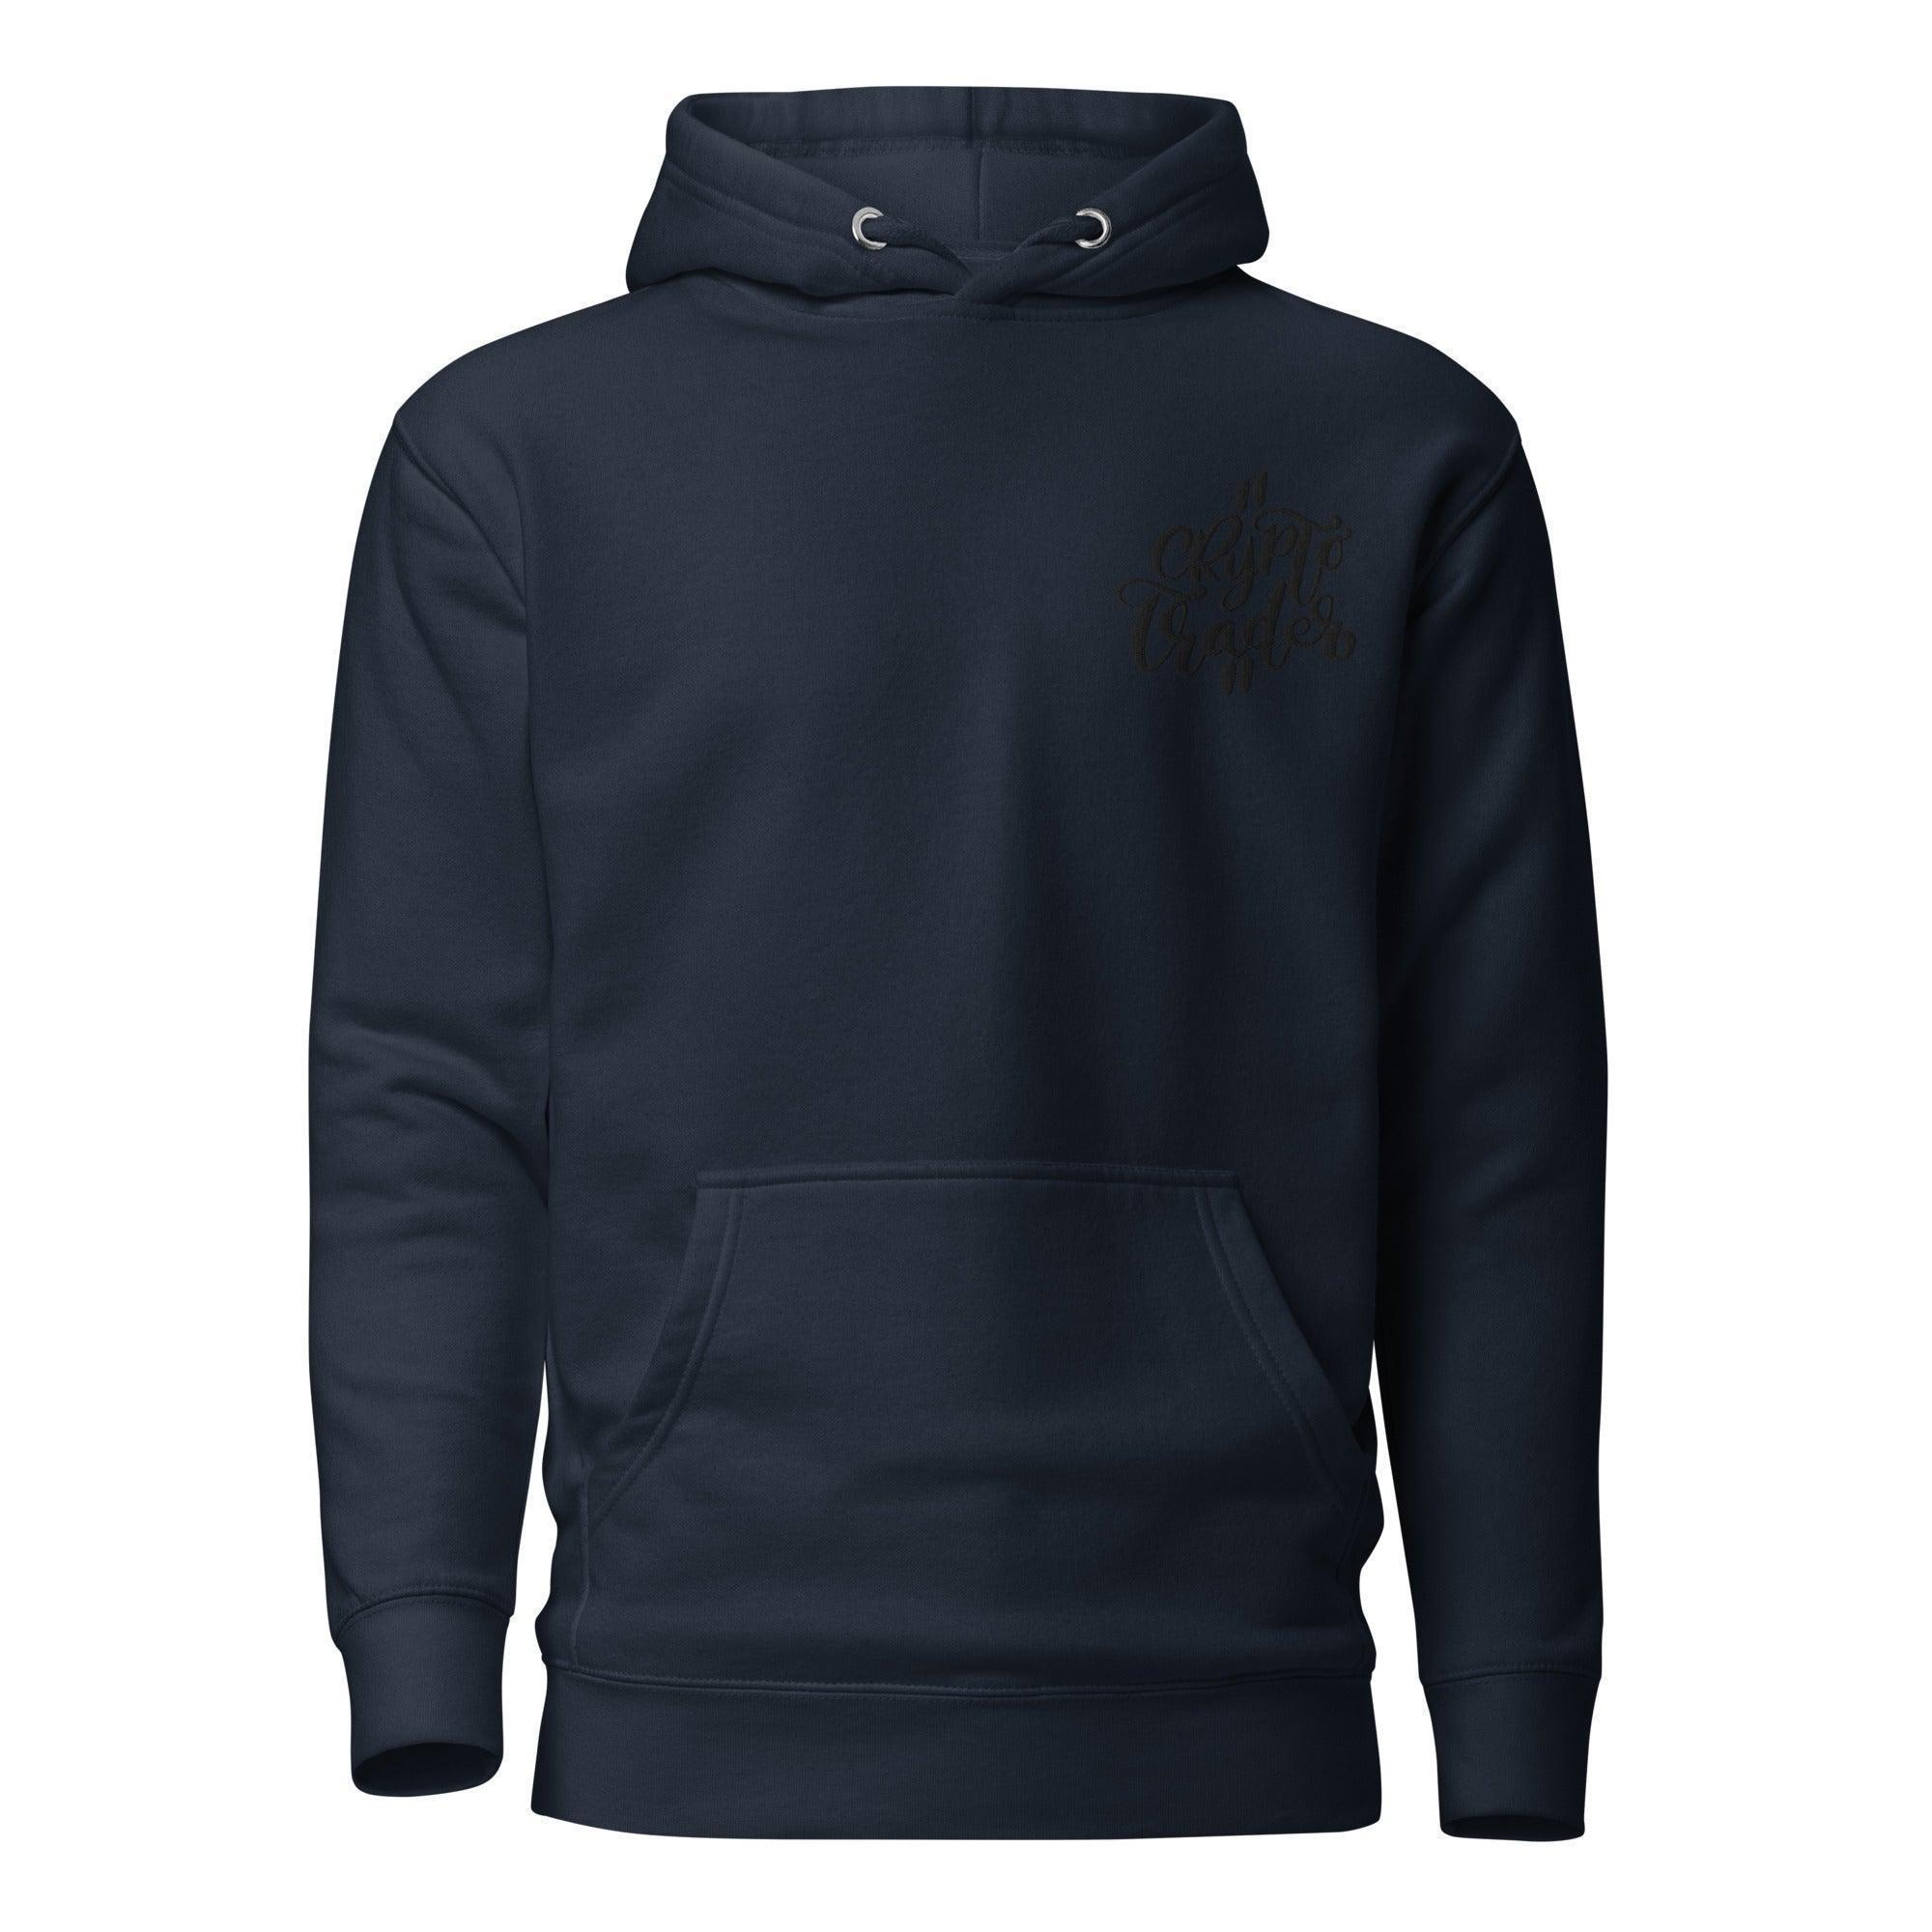 Crypto Trader Sweatsuit - InvestmenTees